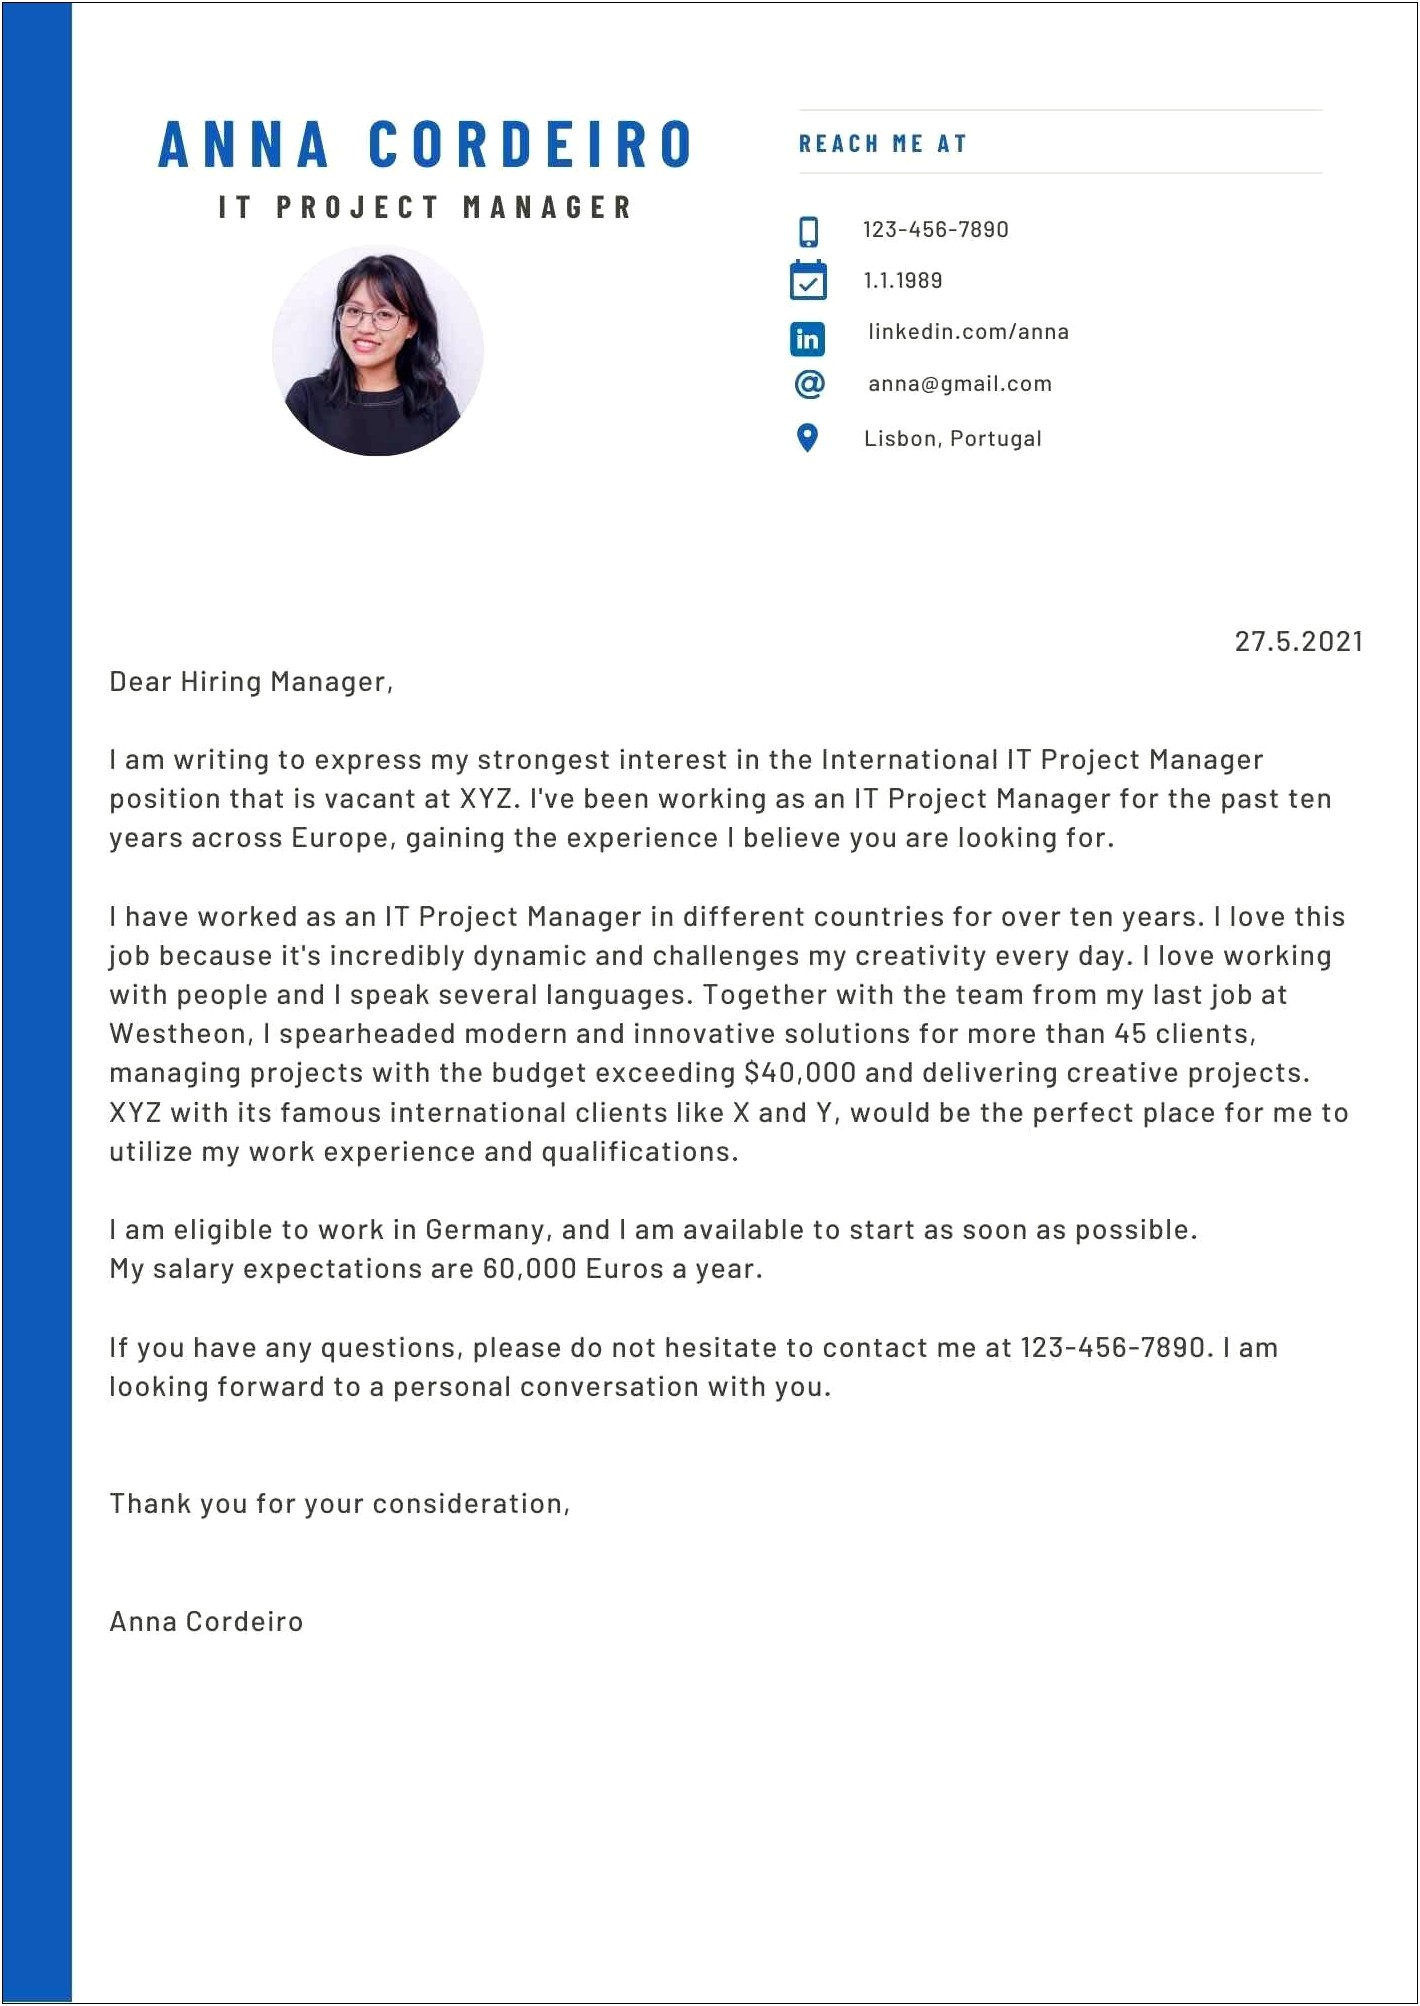 Resume Cover Letter That Match